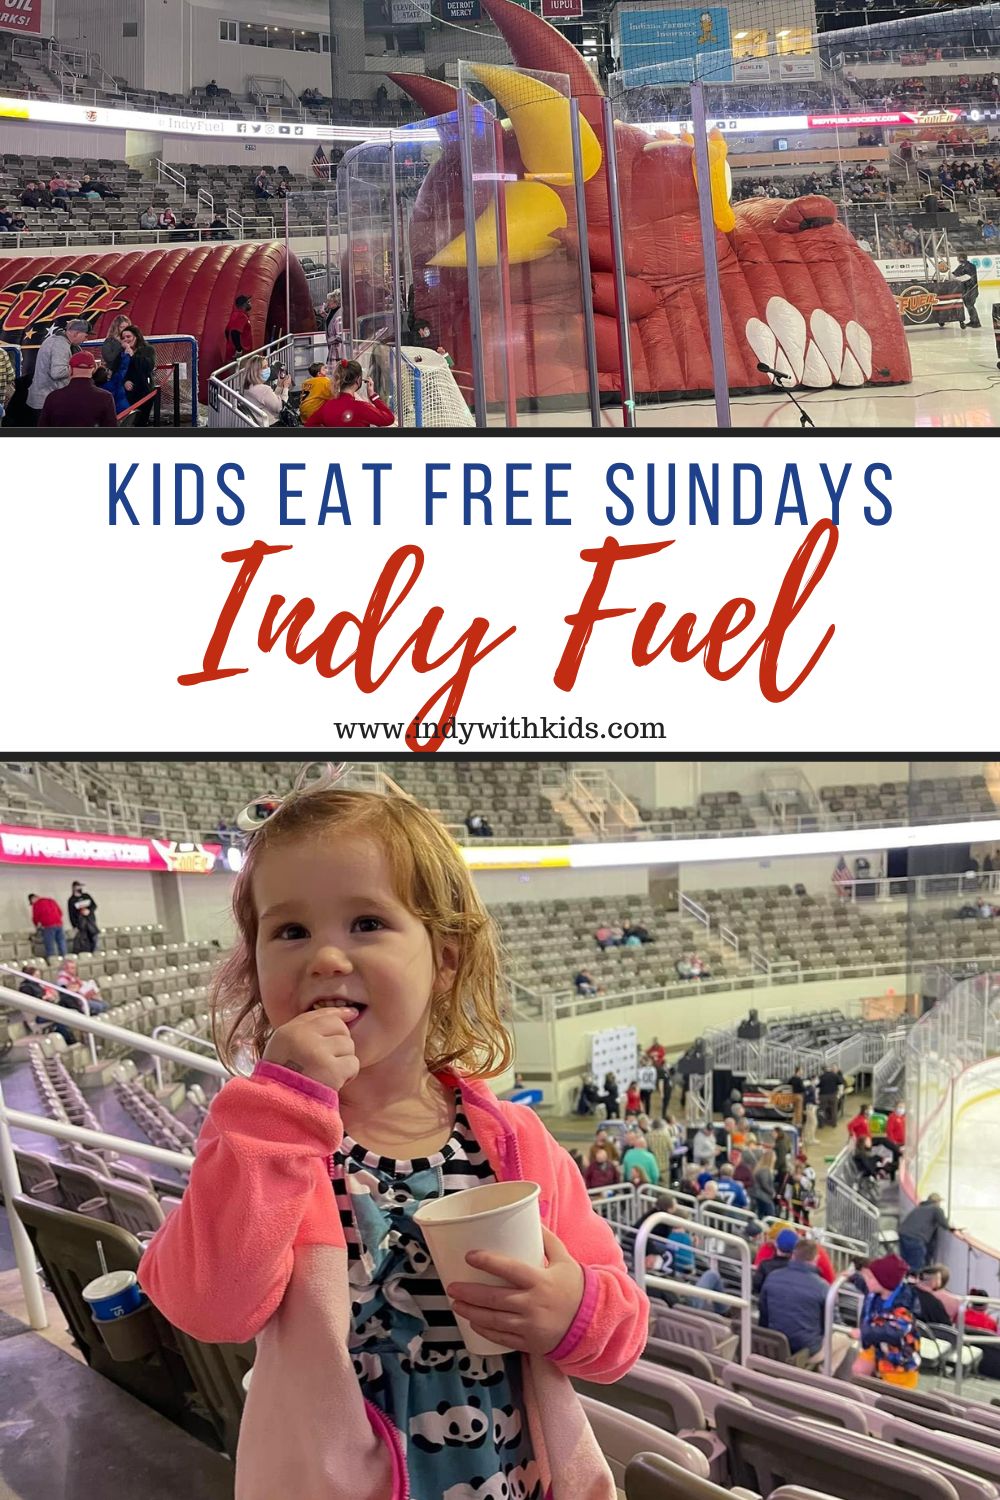 Indy with Kids: Tips for taking the family to an Indy Fuel game